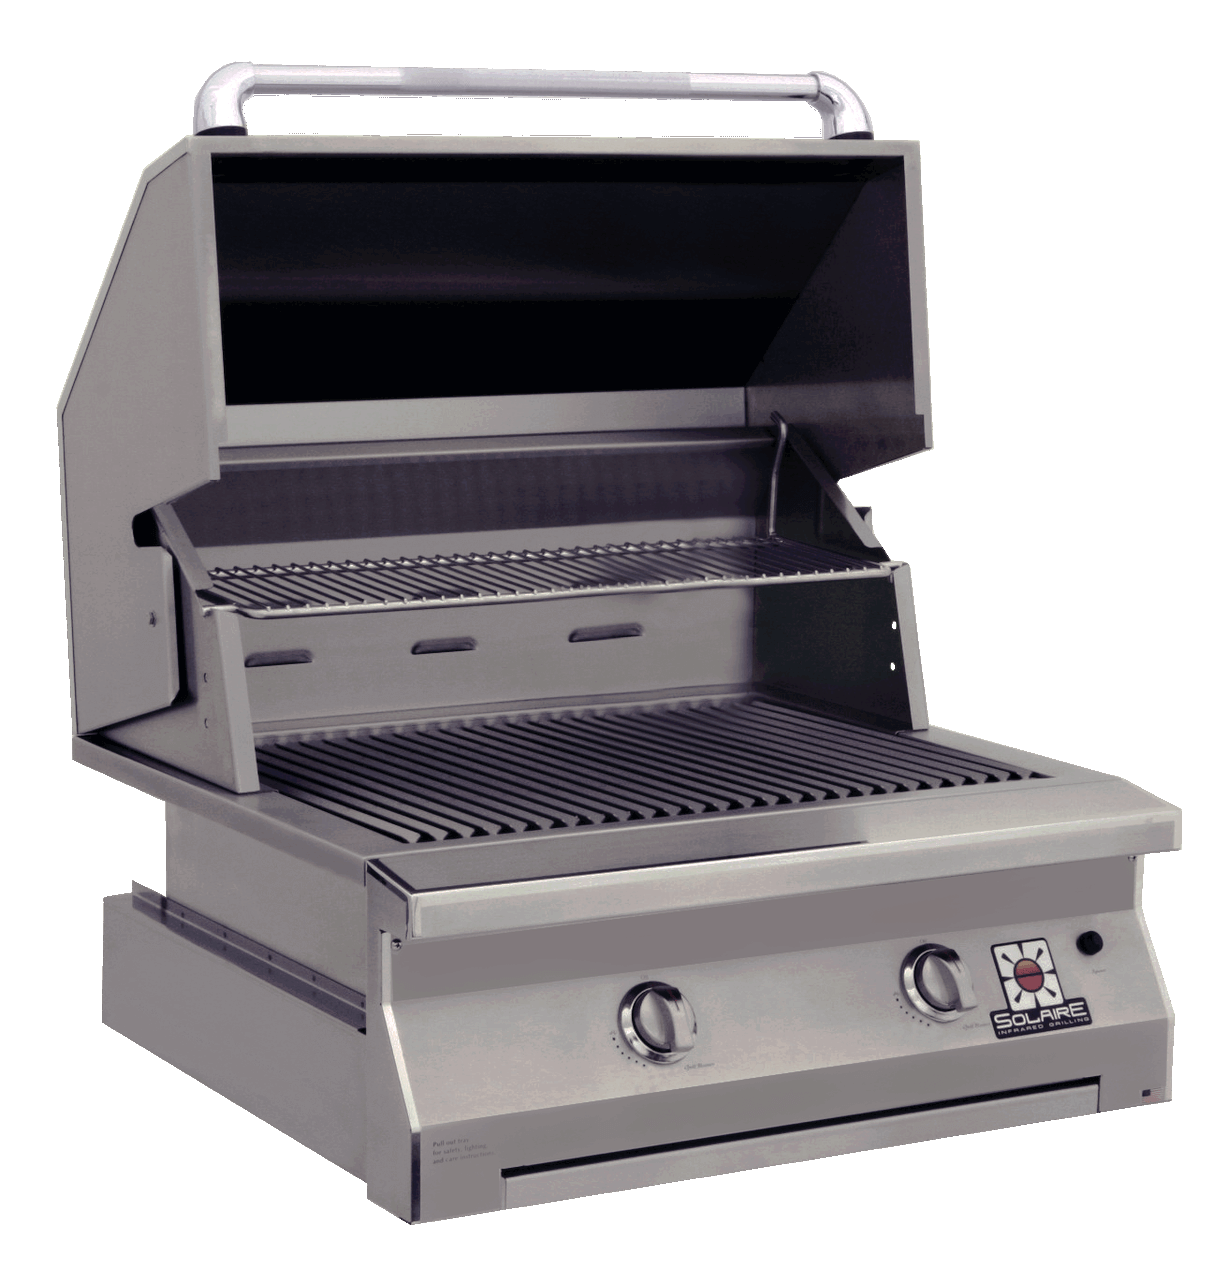 Top Of The Line Grills in Colorado – Part 1